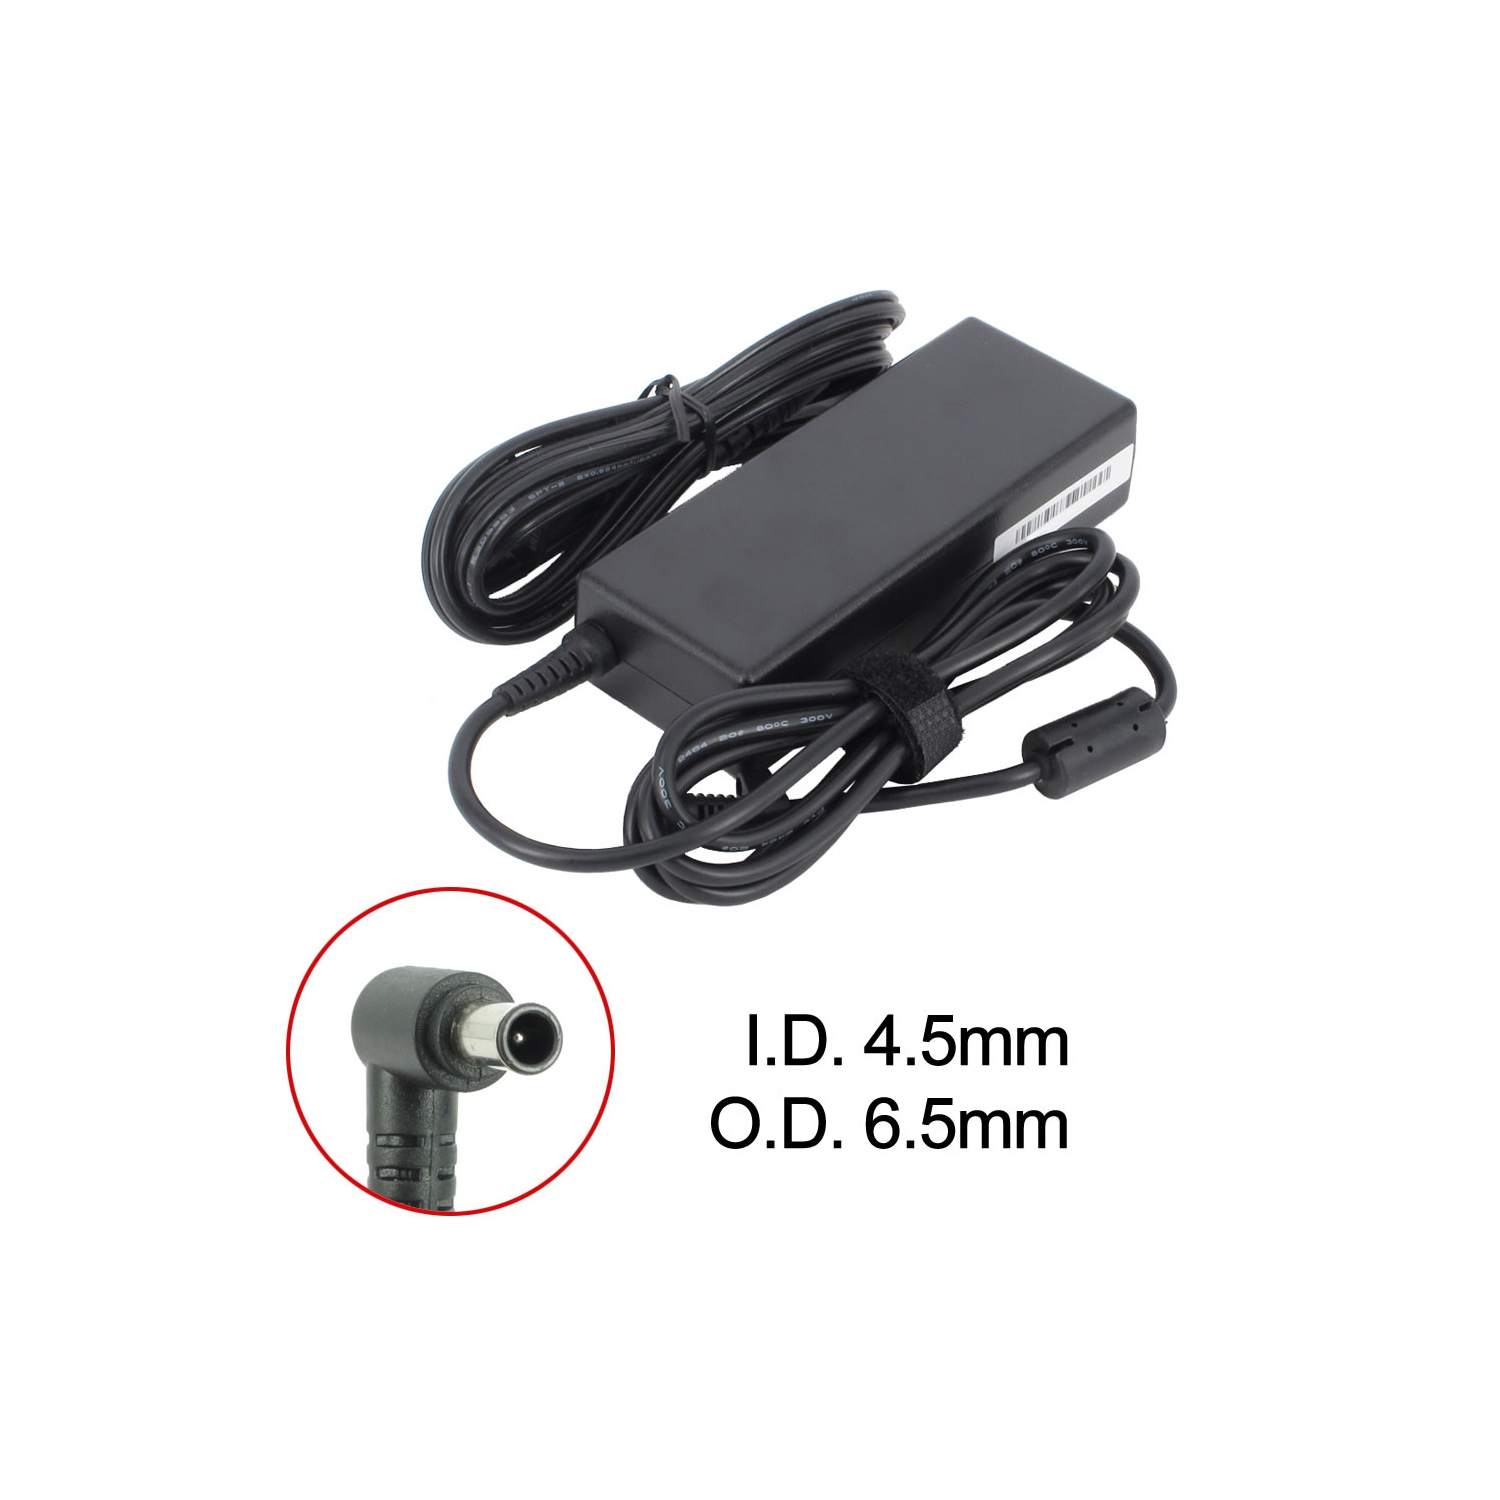 Brand New Laptop AC Adapter for Sony VAIO VGN-BZ540N/B, PCGA-AC19V1, PCGA-AC19V23, VGP-AC19V19, VGP-AC19V27, VGP-AC19V48